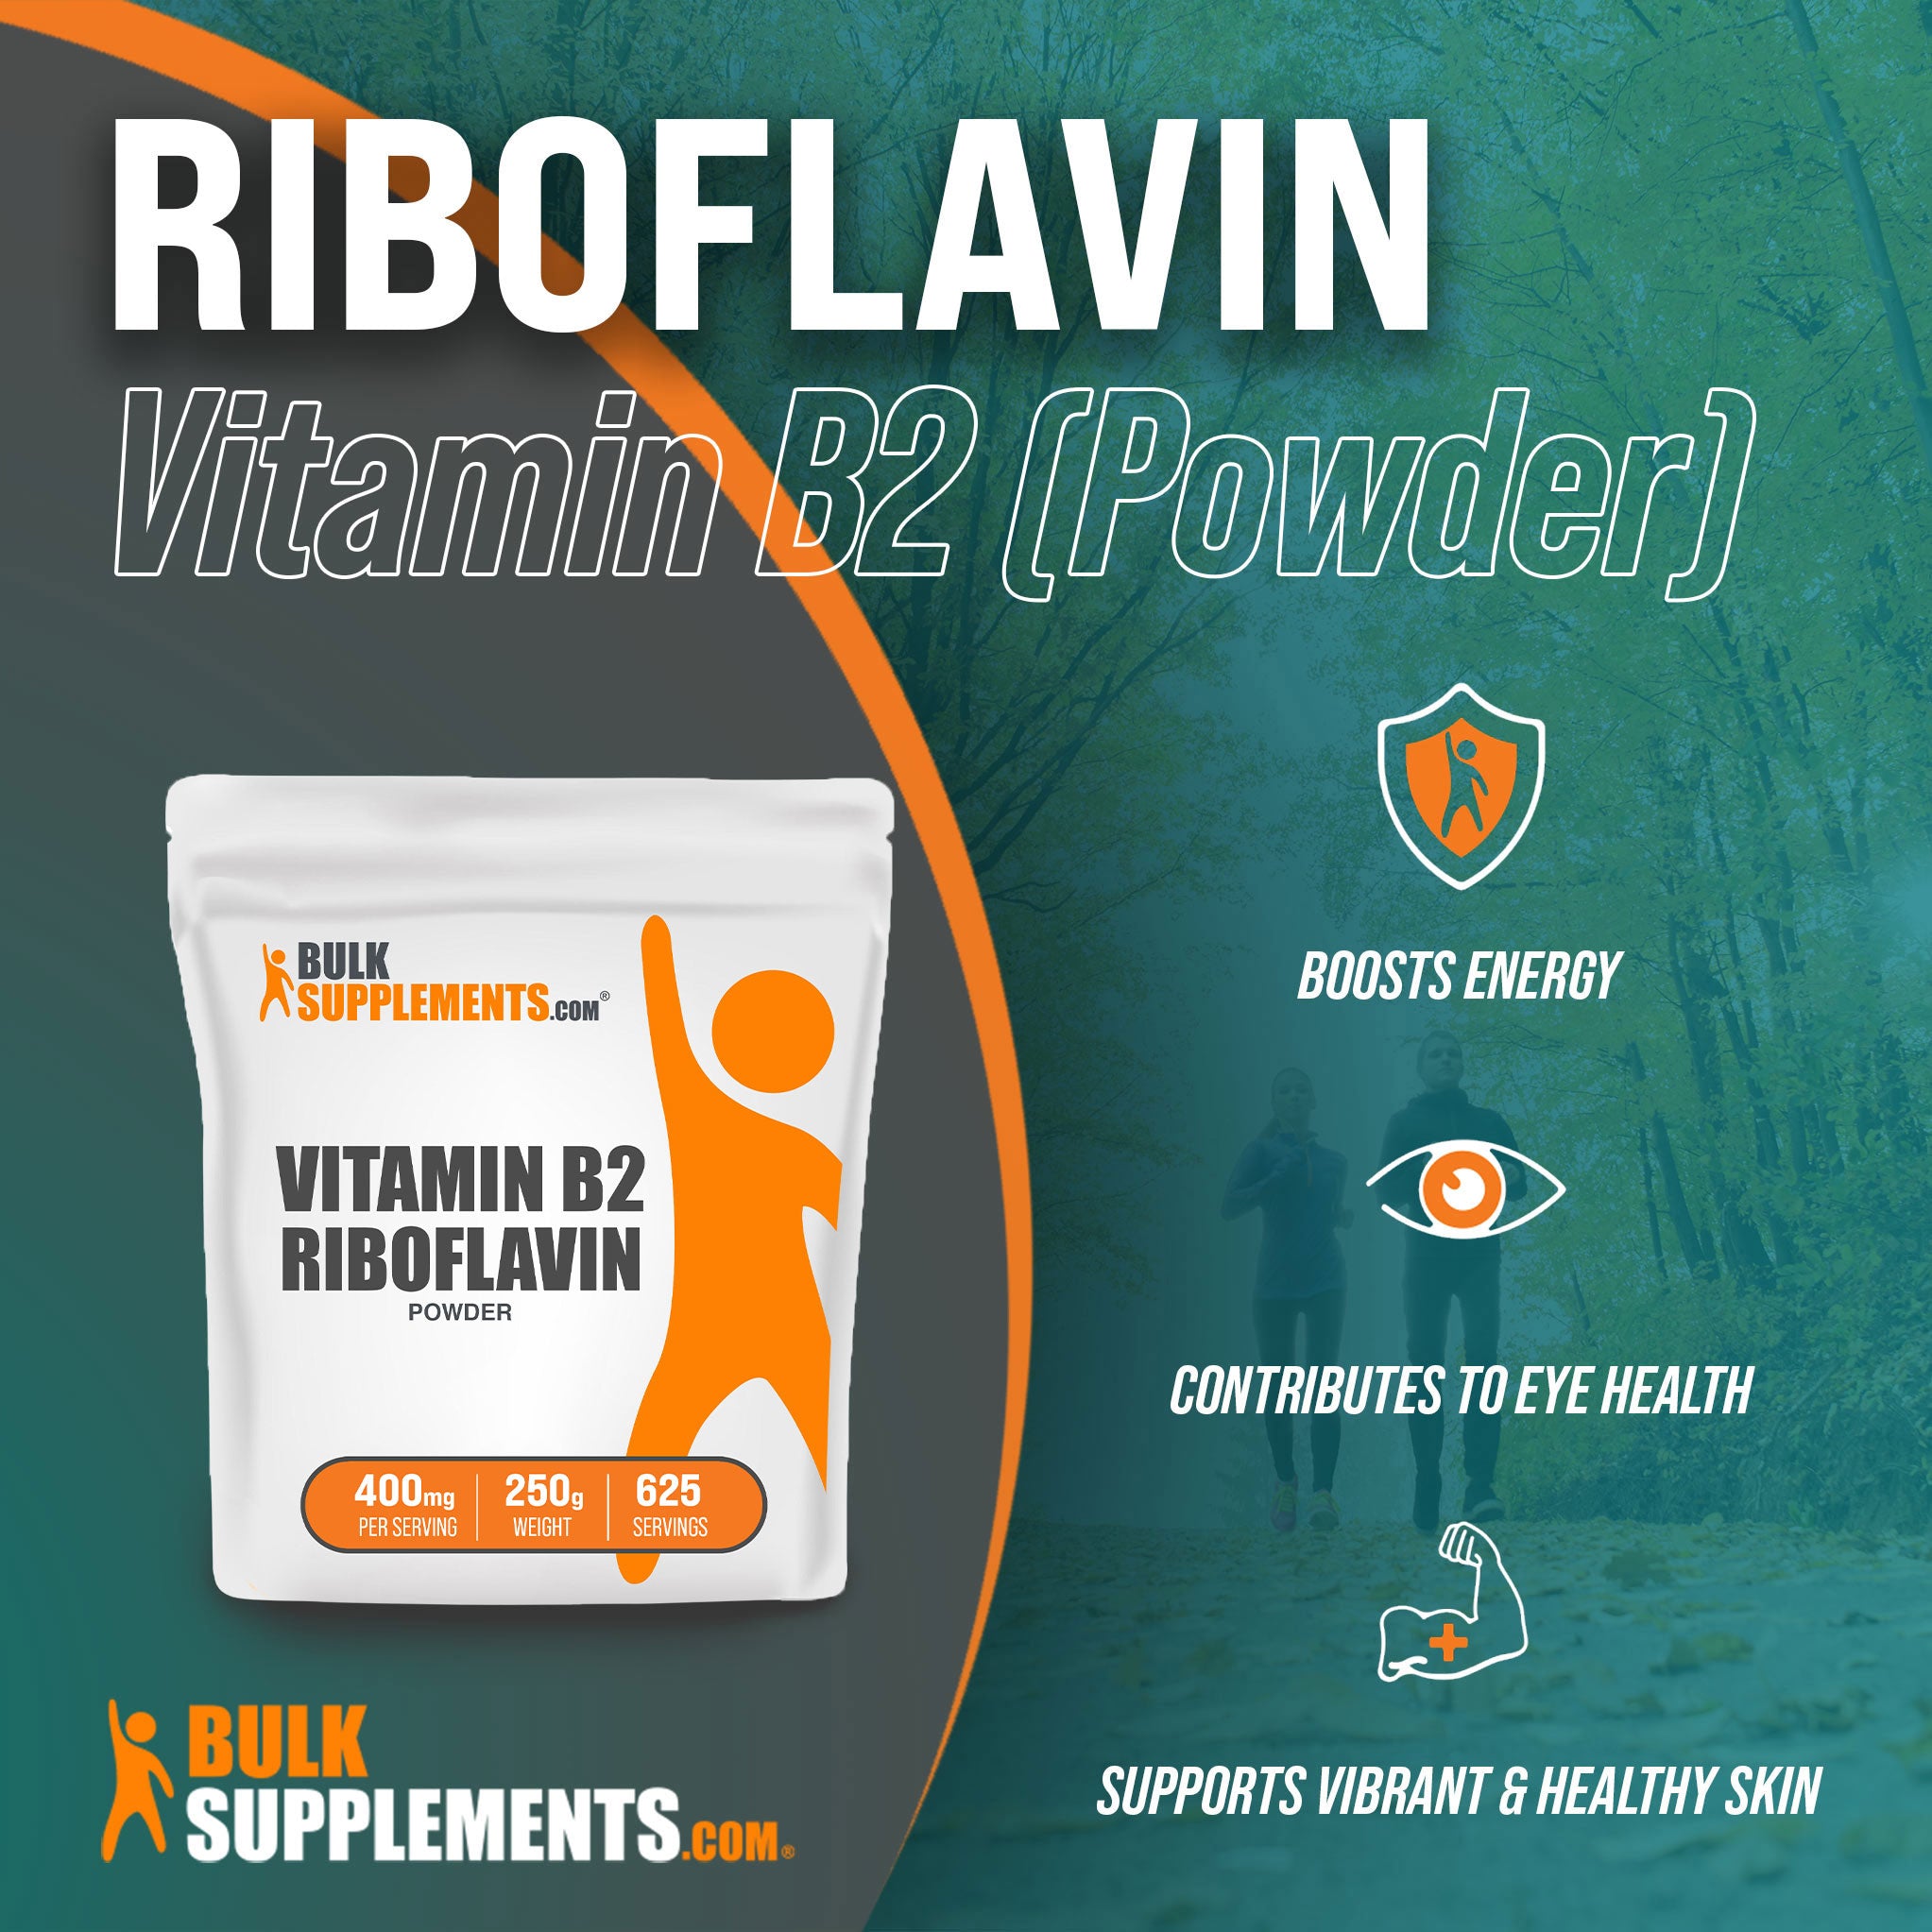 Benefits of Riboflavin Vitamin B2: boosts energy, contributes to eye health, supports vibrant and healthy skin